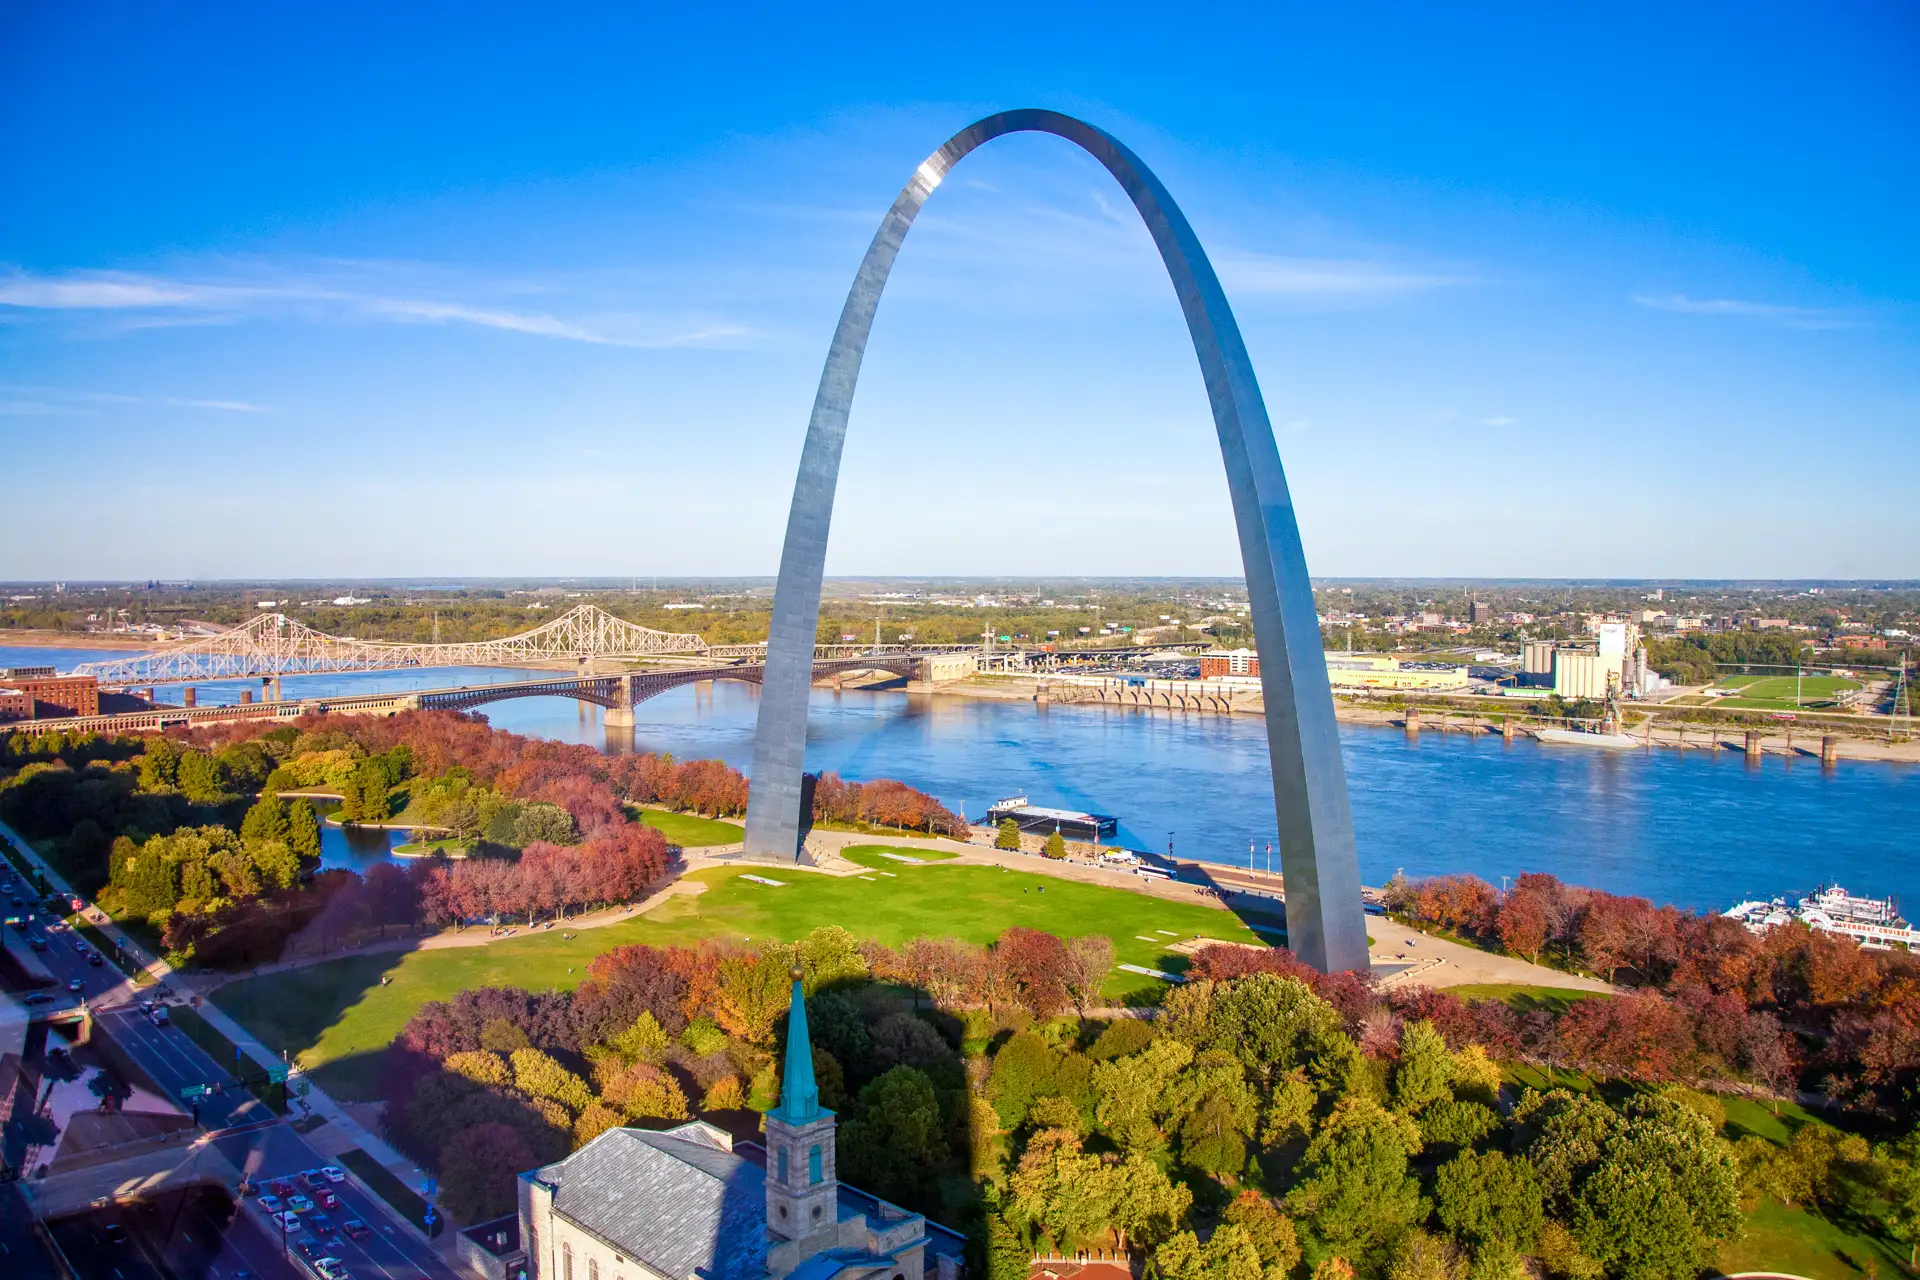 St. Louis Arch; Courtesy by amolson7/Shutterstock.com